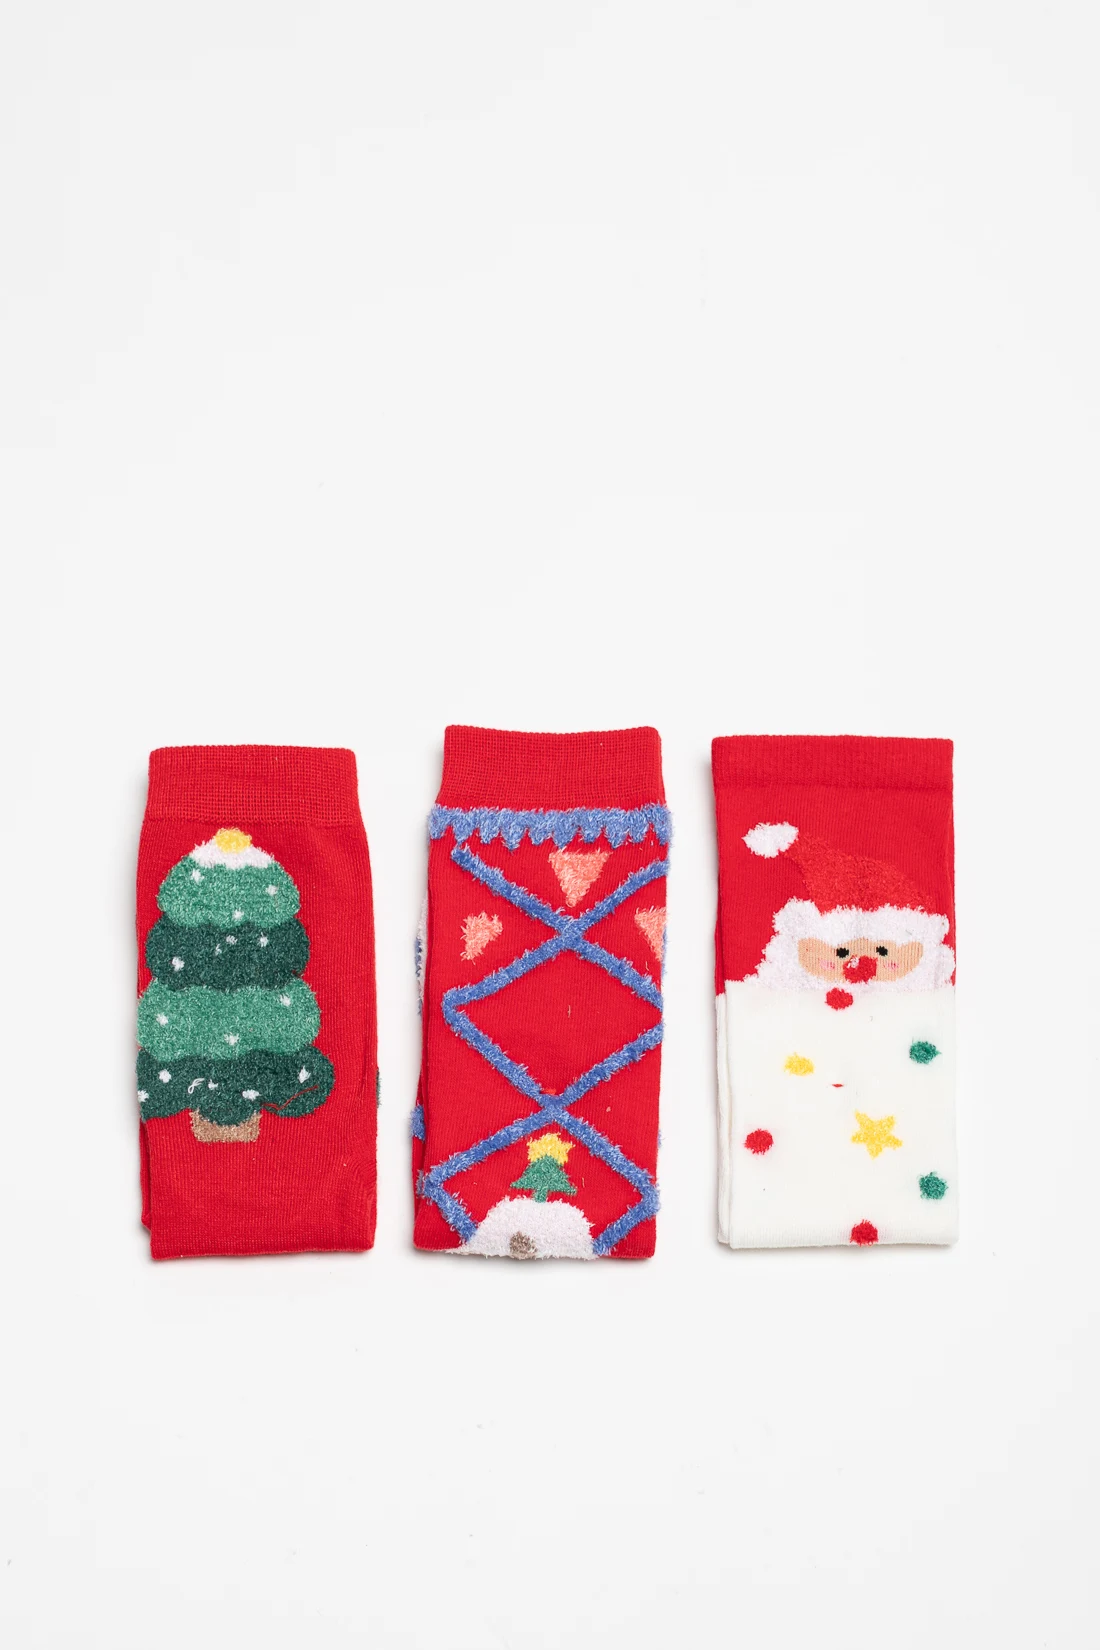 PACK 3 CALCETINES CRAZY - ROJO